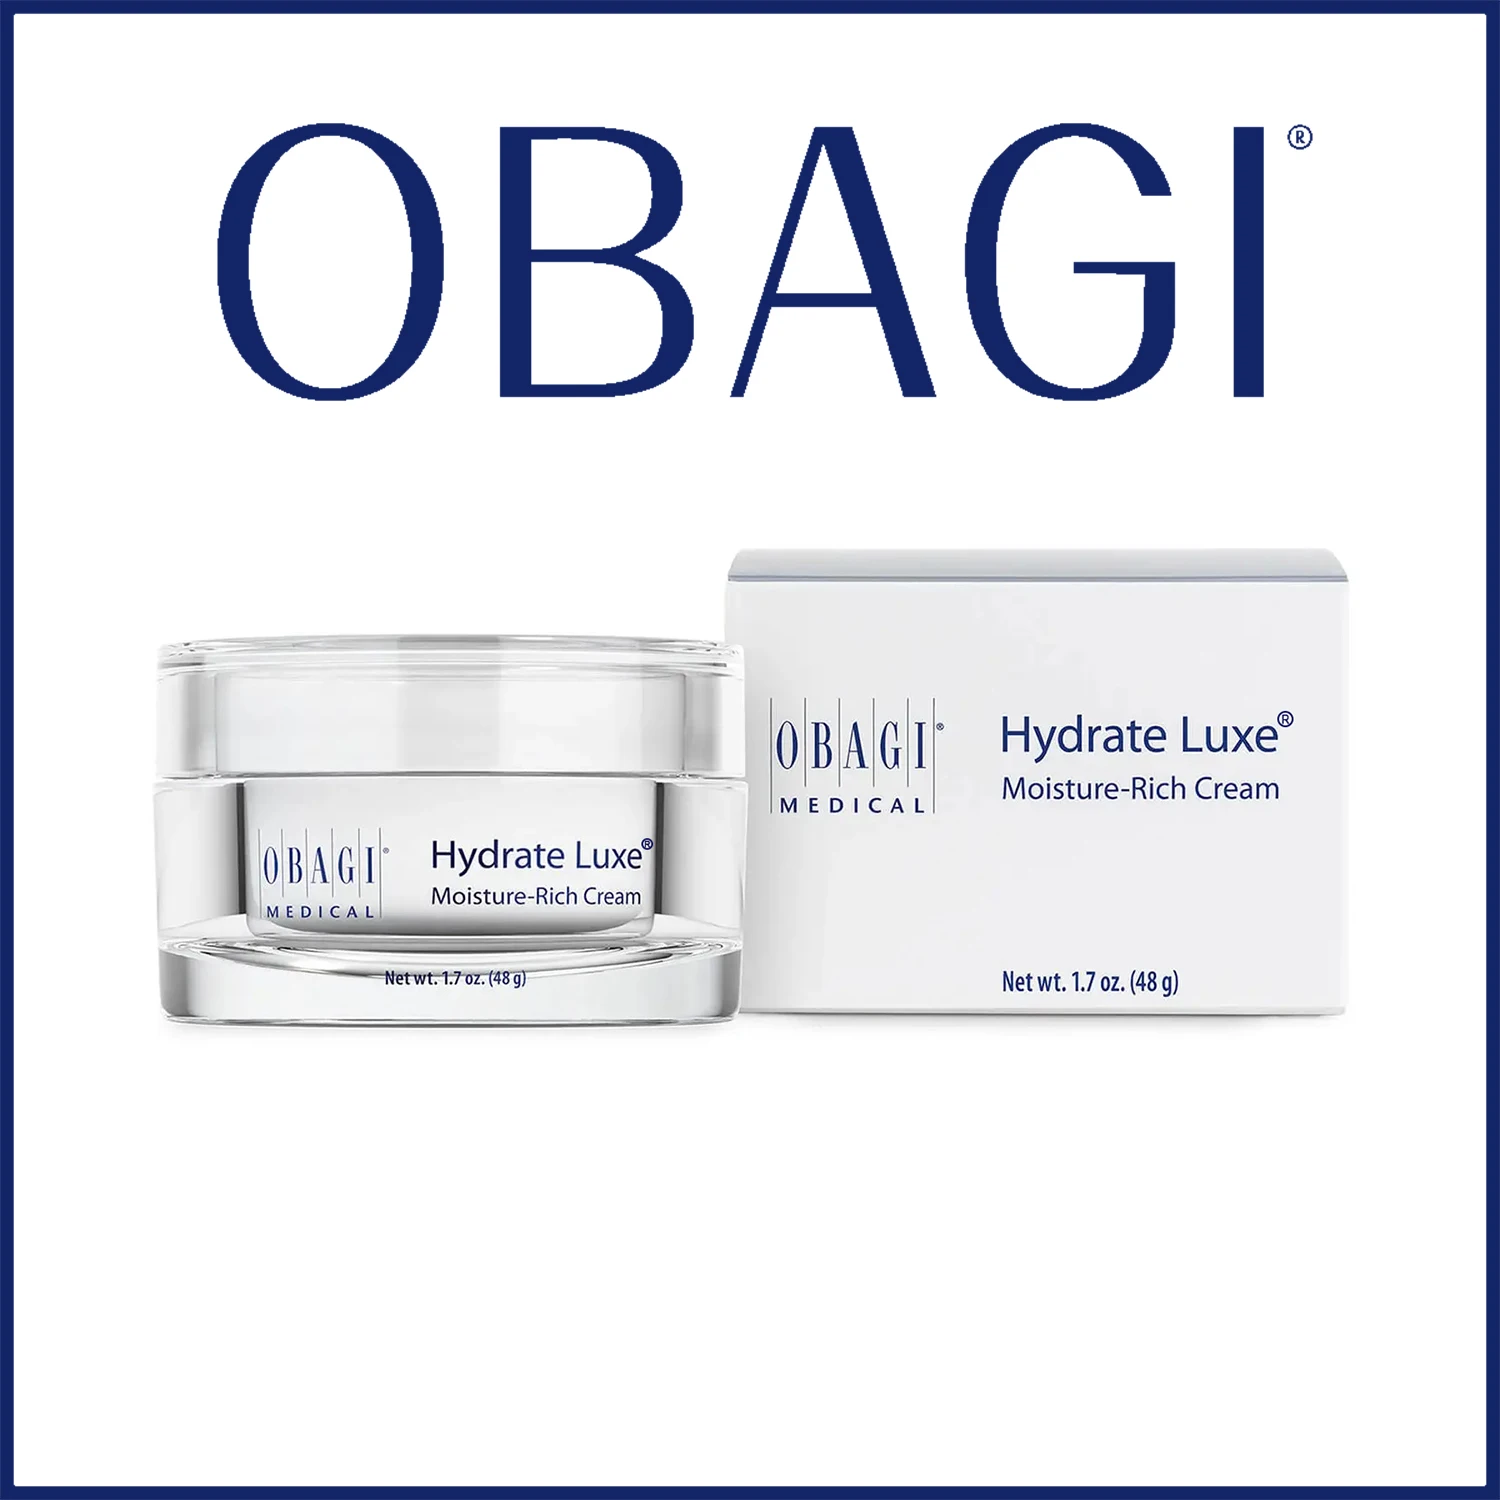 

Obagi Hydrate Luxe Moisture-Rich Cream Hydrating Face Lotion Moisturization Night Face Cream for Dry Skin Sensitive Aging Skin